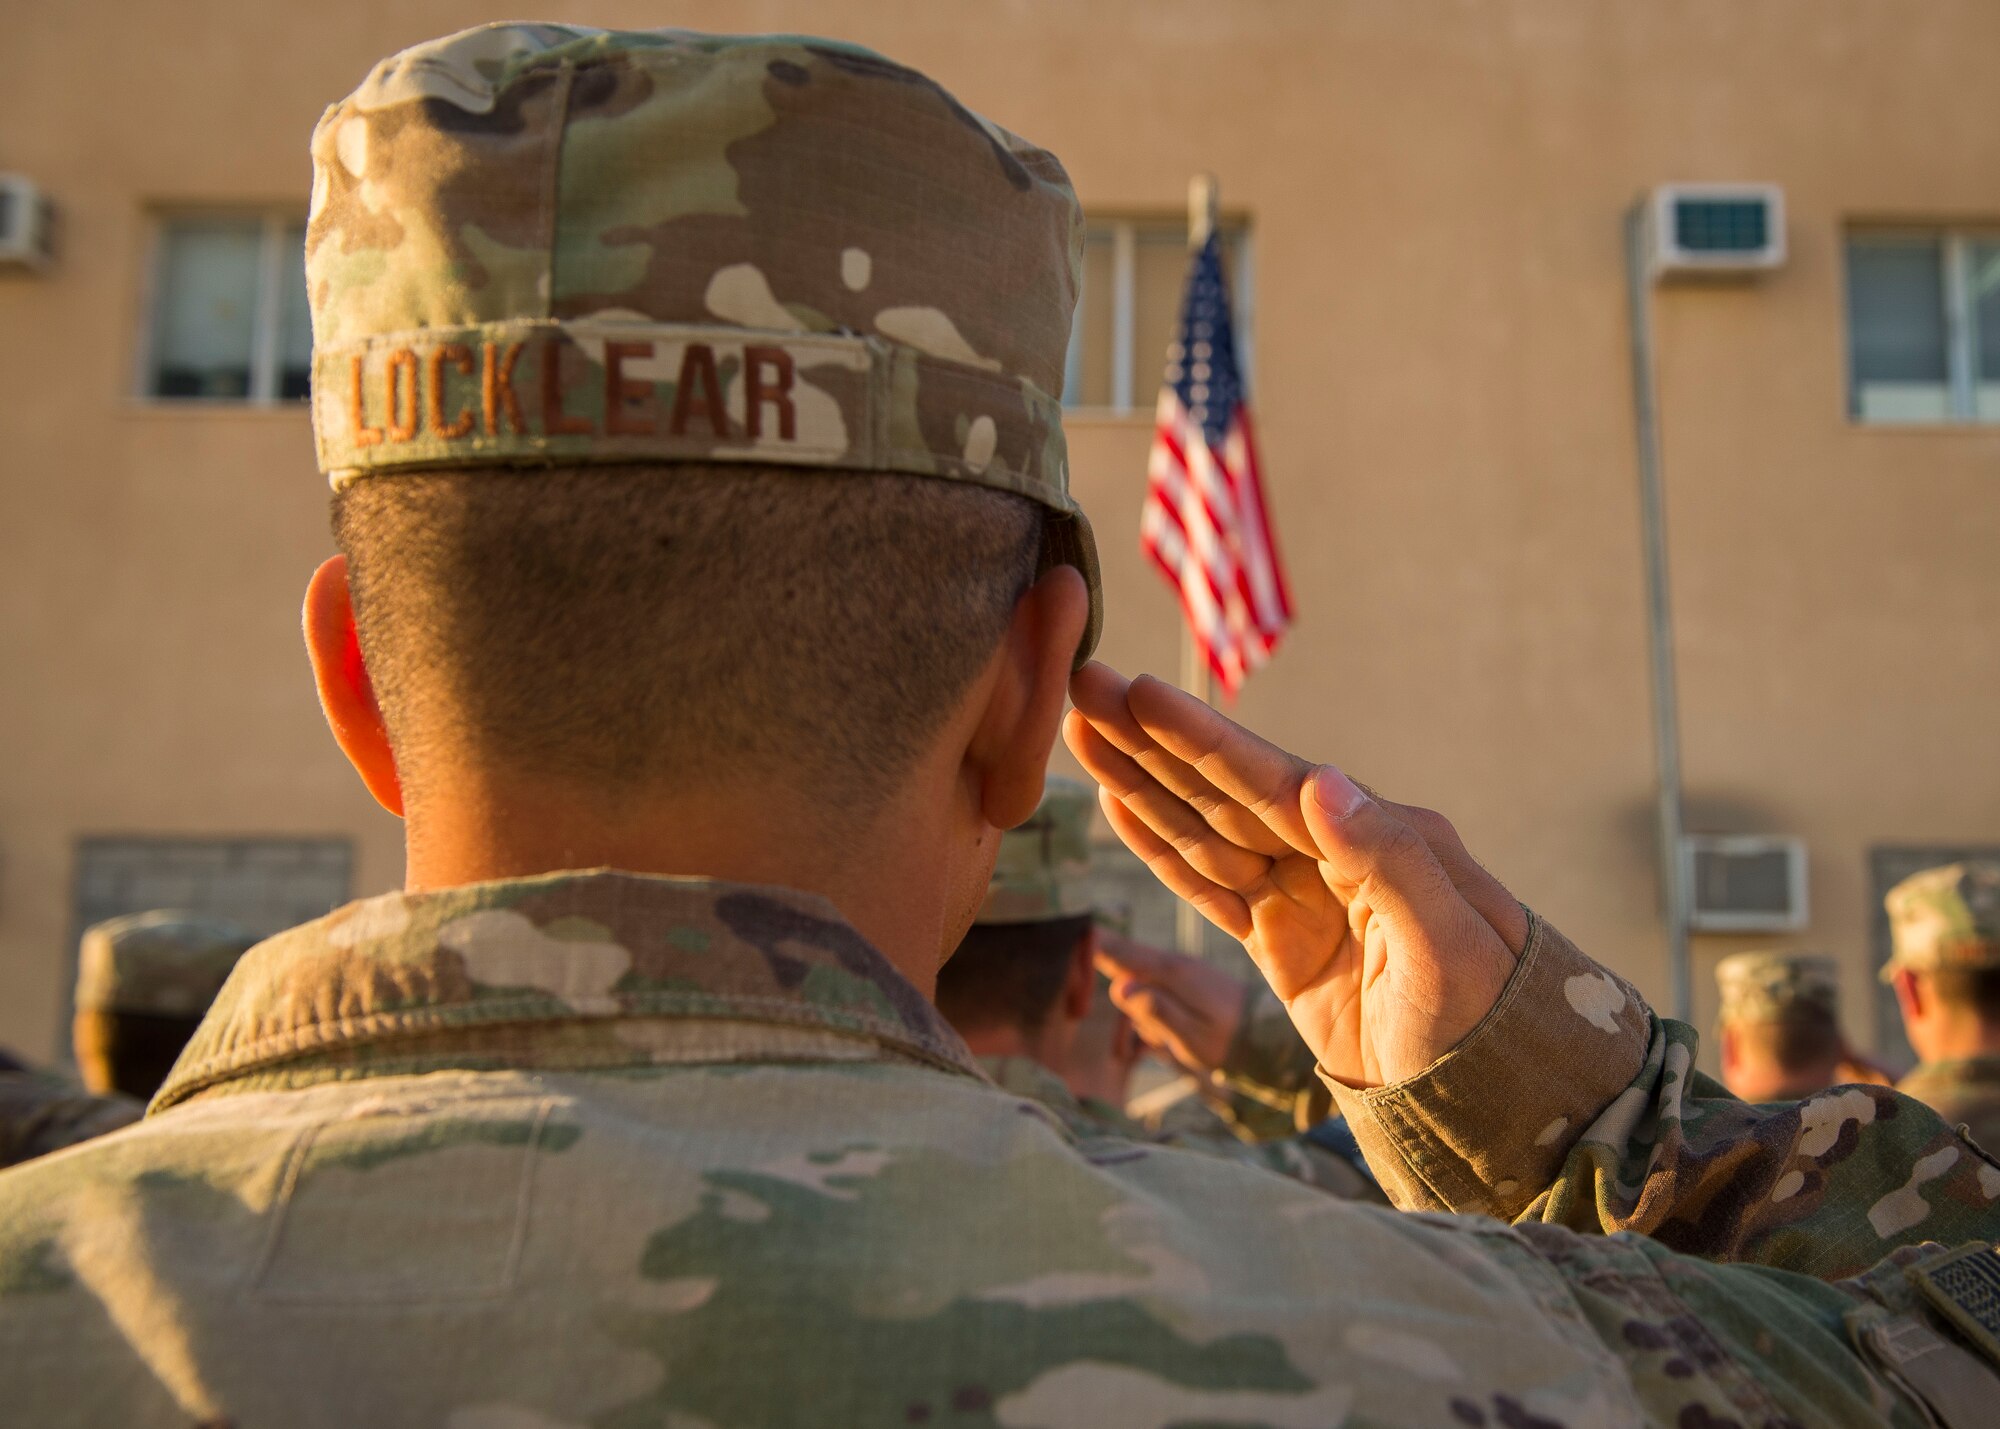 U.S. Air Force Senior Airman Joshua Locklear, 557th Expeditionary Red Horse Squadron, salutes during a retreat ceremony Dec. 30, 2016, in Southwest Asia. The retreat ceremony serves as a sign of the end of the duty day and pays respect to the U.S. national flag. (U.S. Air Force photo by Staff Sgt. Eboni Reams)